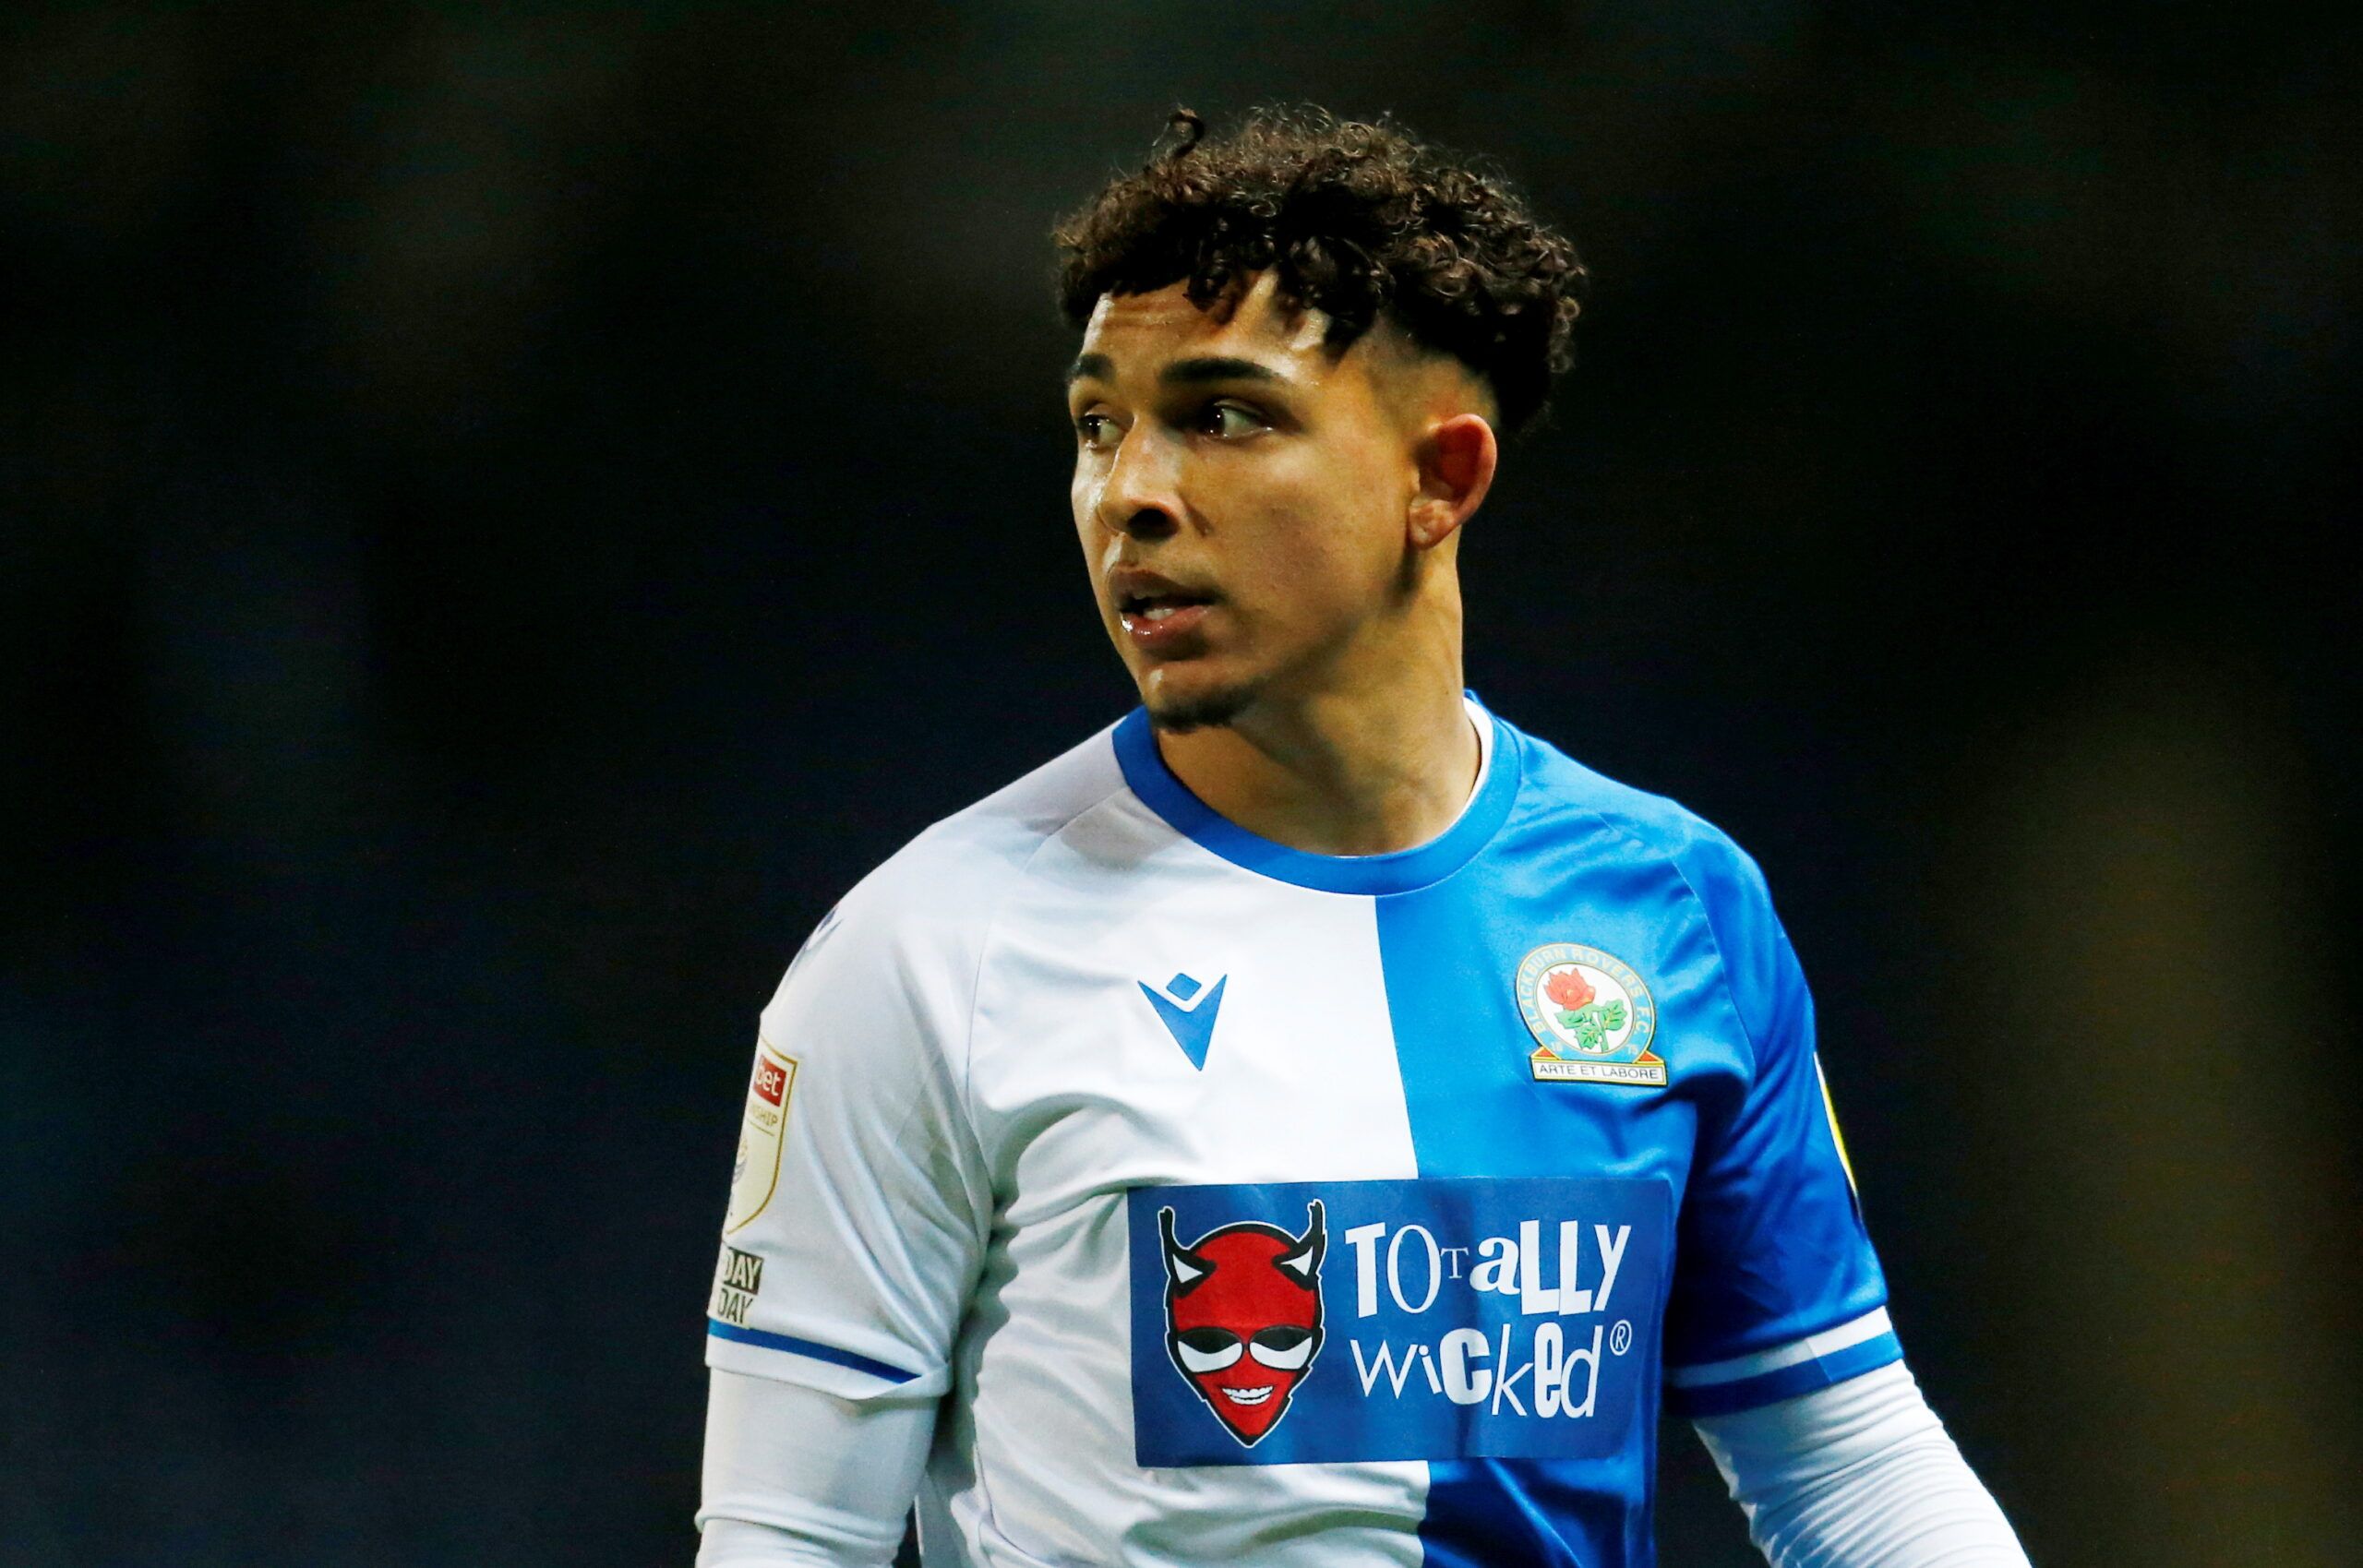 Soccer Football - Championship - Blackburn Rovers v Millwall - Ewood Park, Blackburn, Britain - March 8, 2022  Blackburn Rovers' Tyrhys Dolan reacts   Action Images/Ed Sykes  EDITORIAL USE ONLY. No use with unauthorized audio, video, data, fixture lists, club/league logos or 